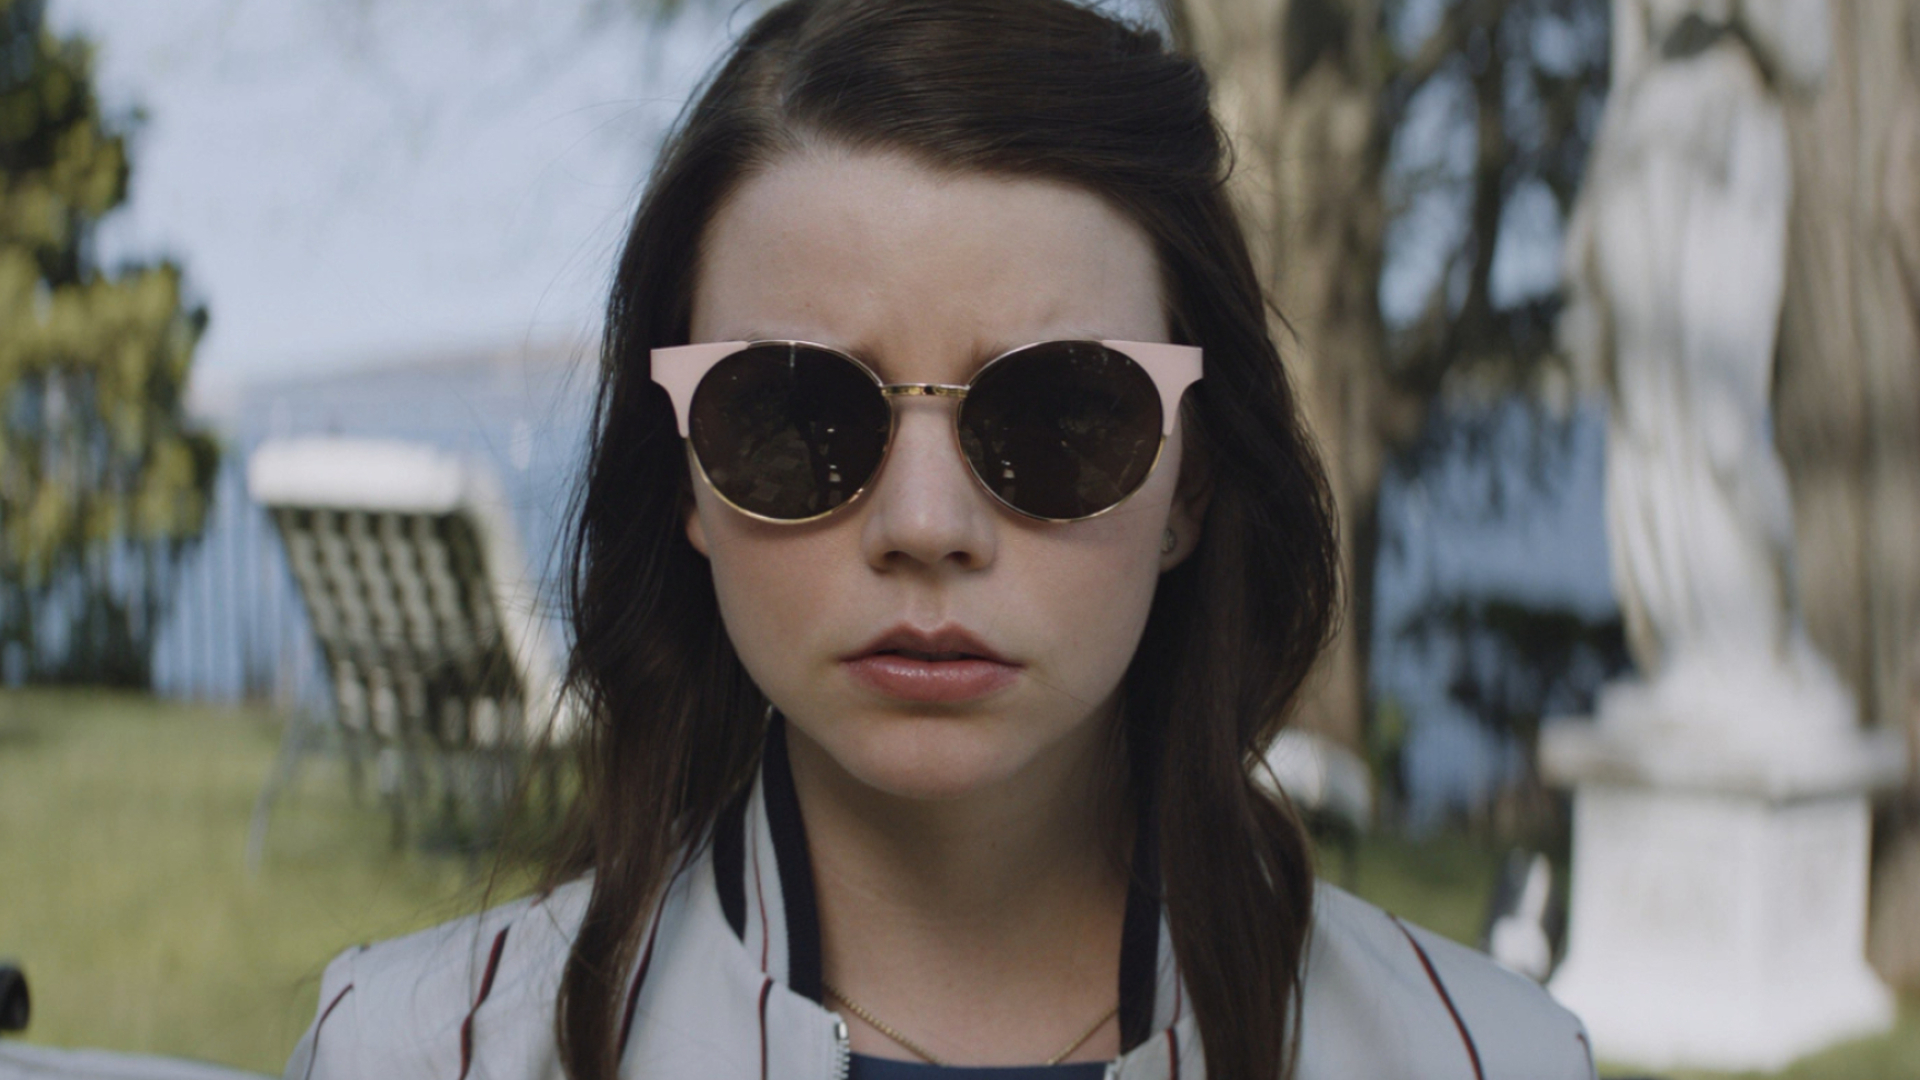 Thoroughbreds, Tense atmosphere, Masterfully crafted, Unsettling drama, 1920x1080 Full HD Desktop